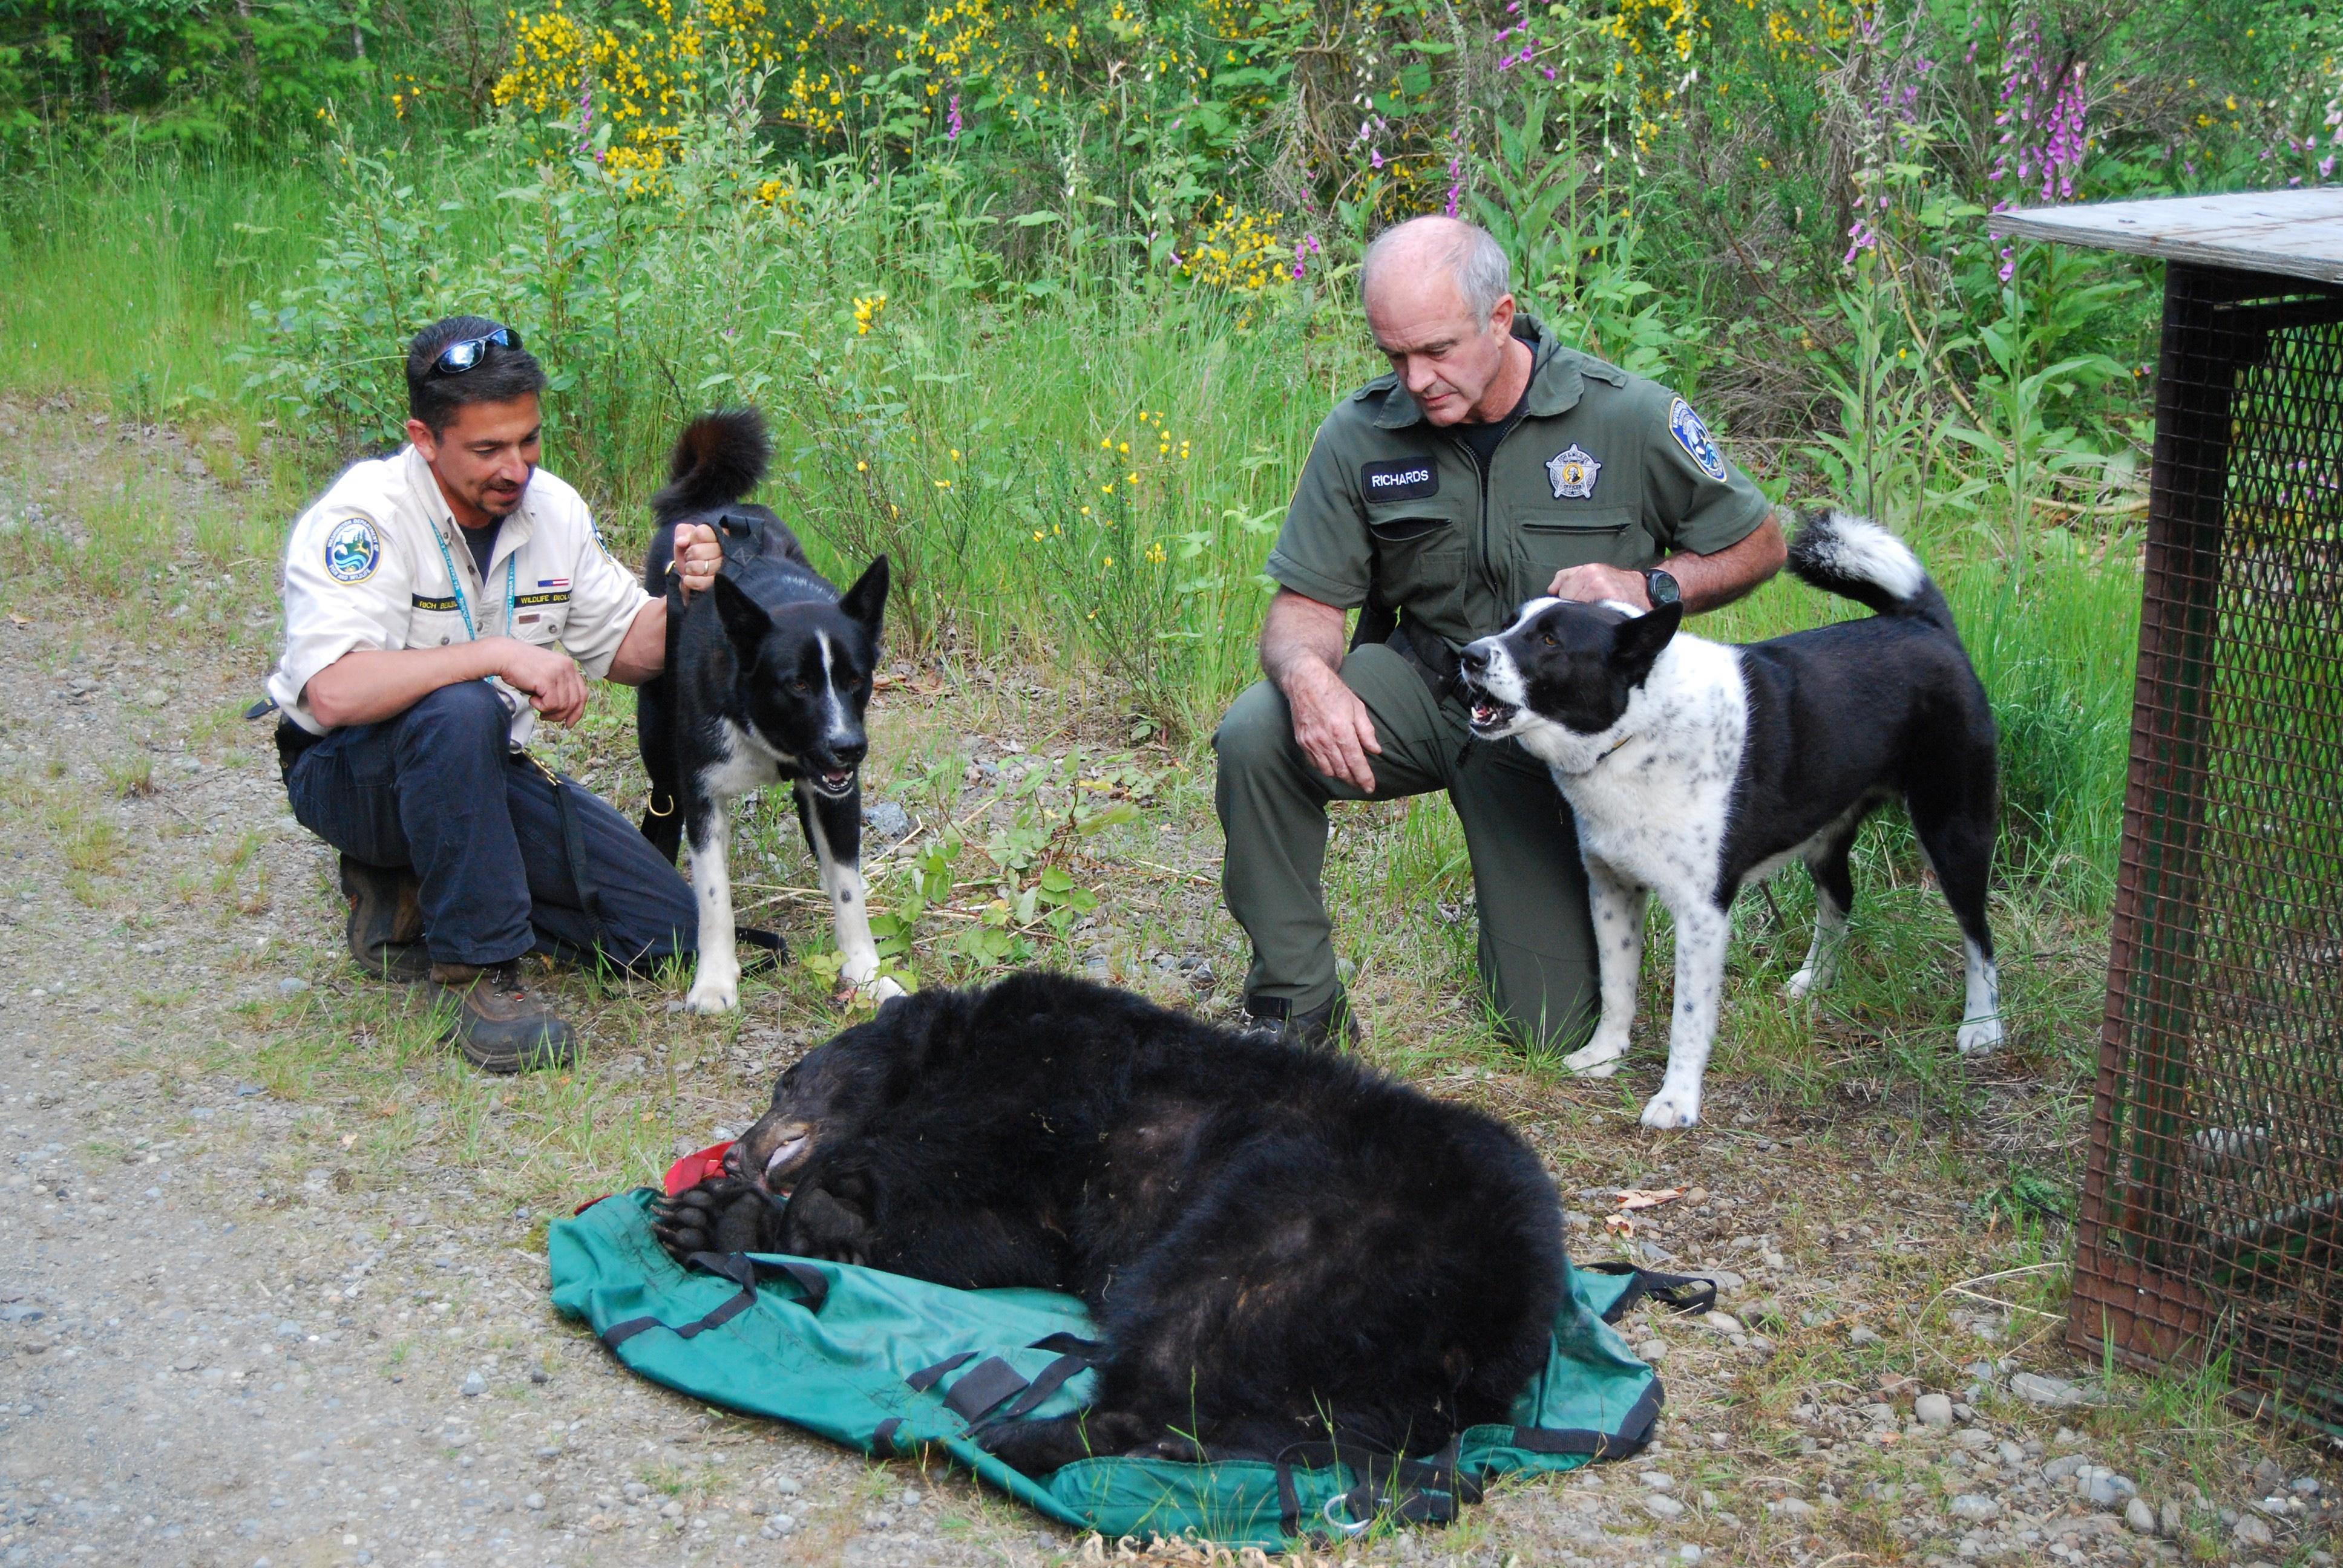 Washington S First Karelian Bear Dogs Credited With Busting Poachers And Saving Kittens Die The Spokesman Review